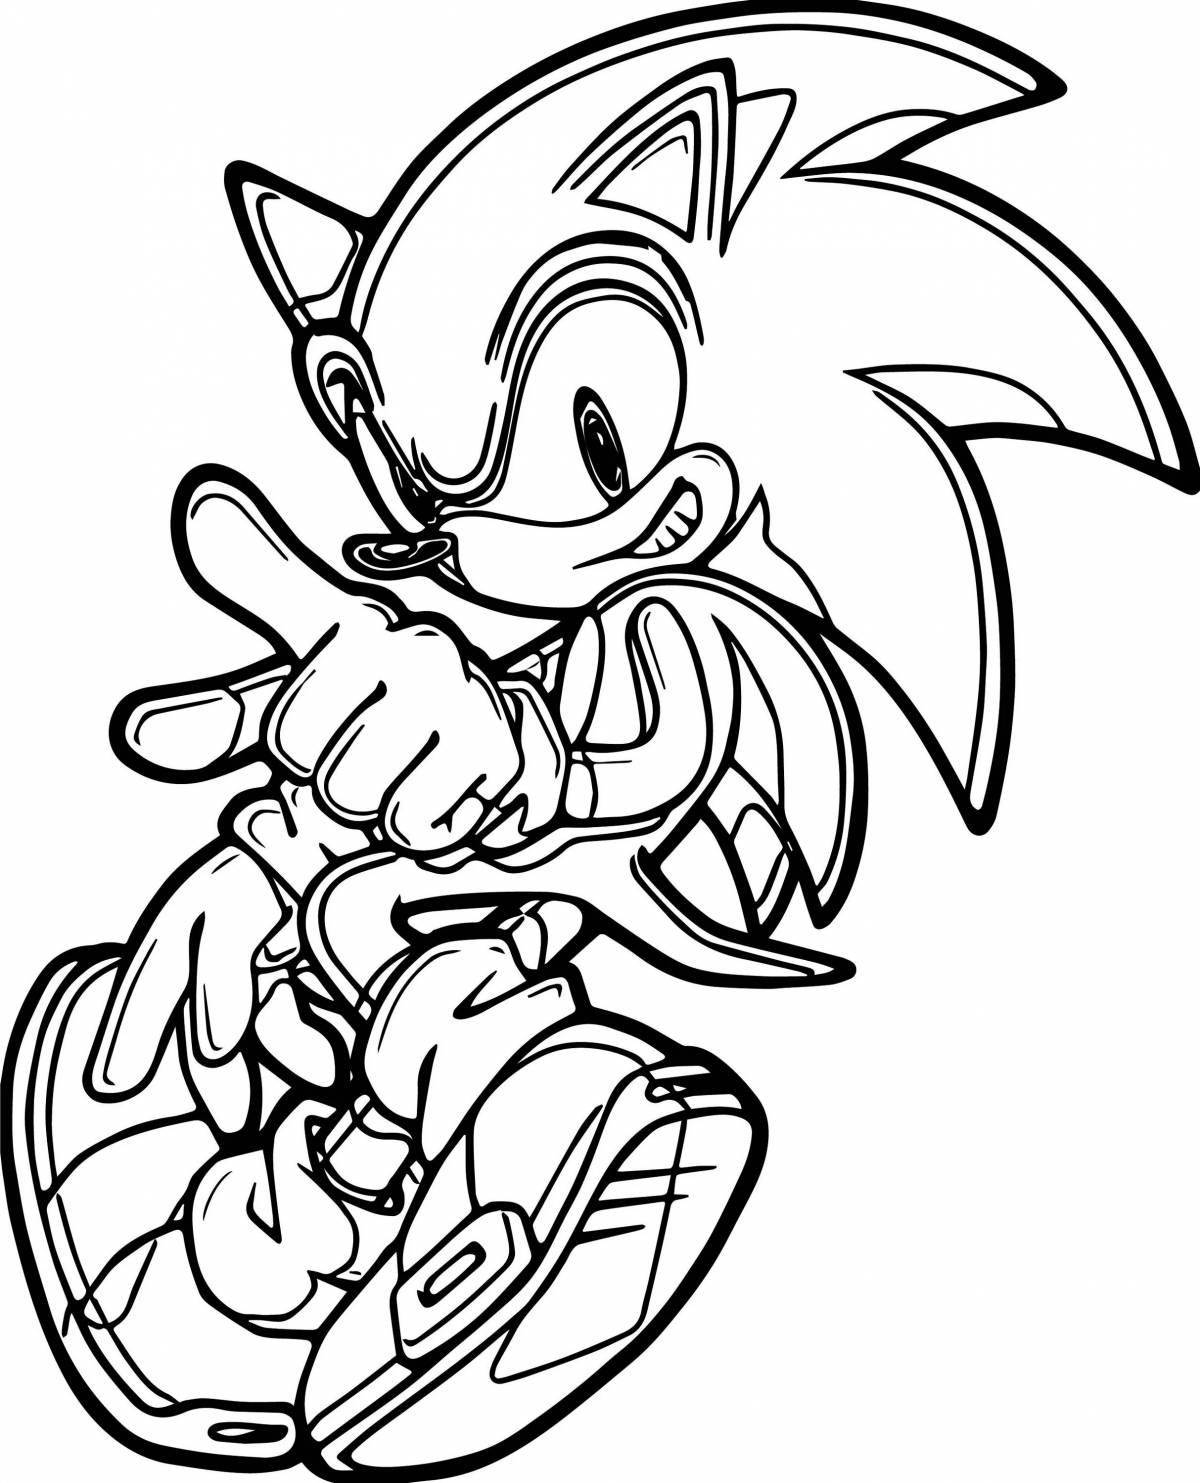 Brilliantly detailed darkspine sonic coloring page